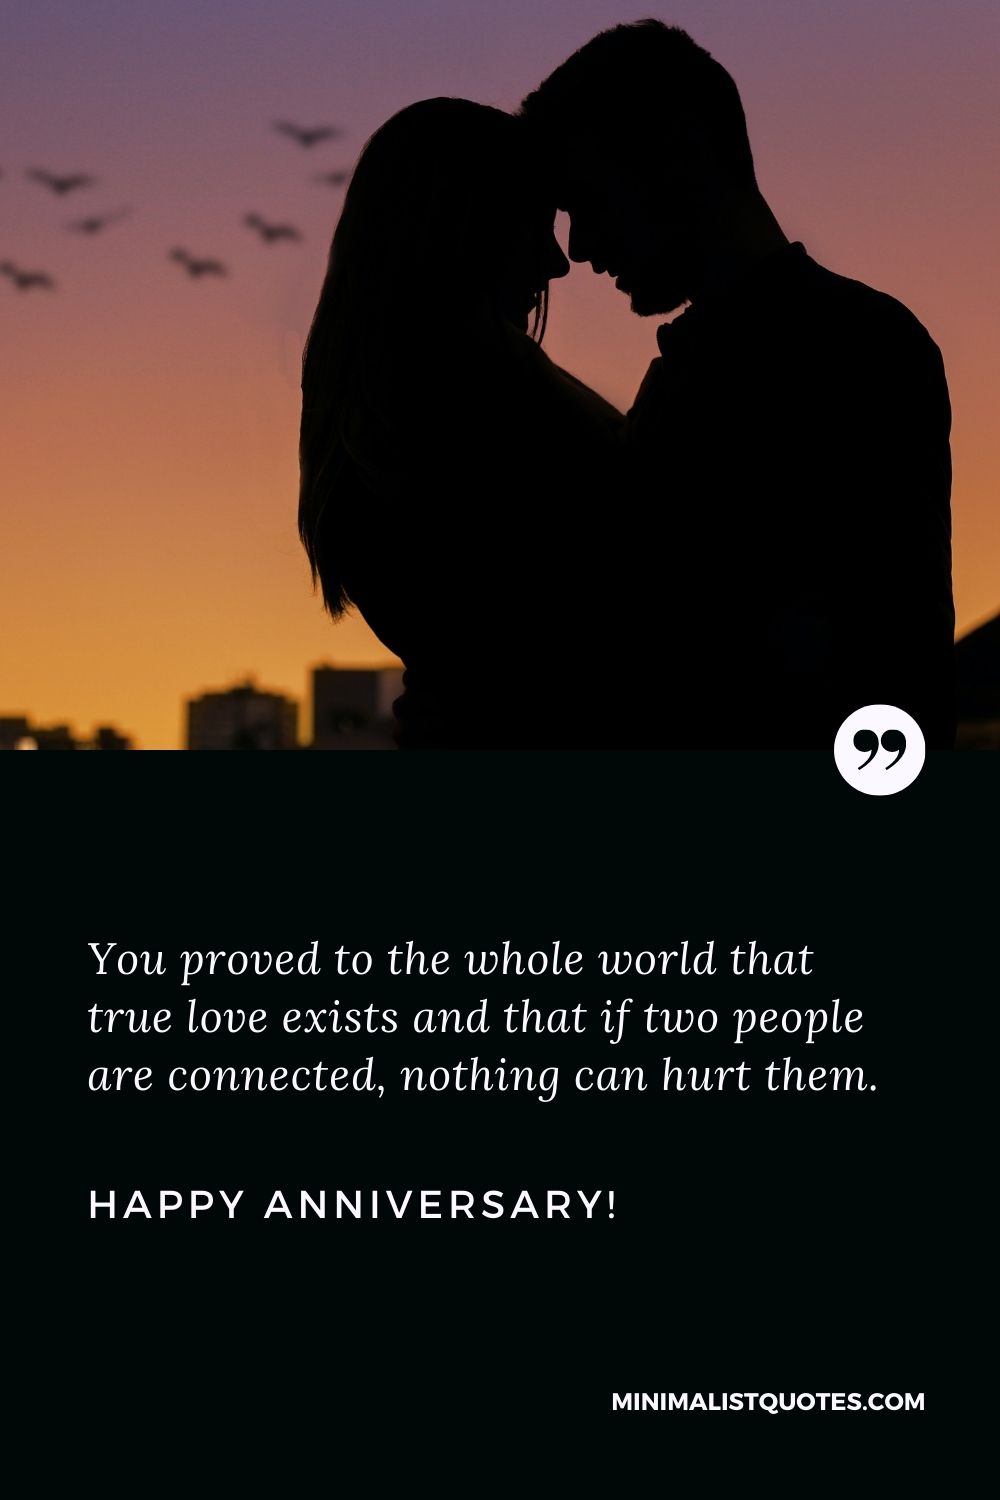 Wedding anniversary greetings: You proved to the whole world that true love exists and that if two people are connected, nothing can hurt them. Happy Anniversary!